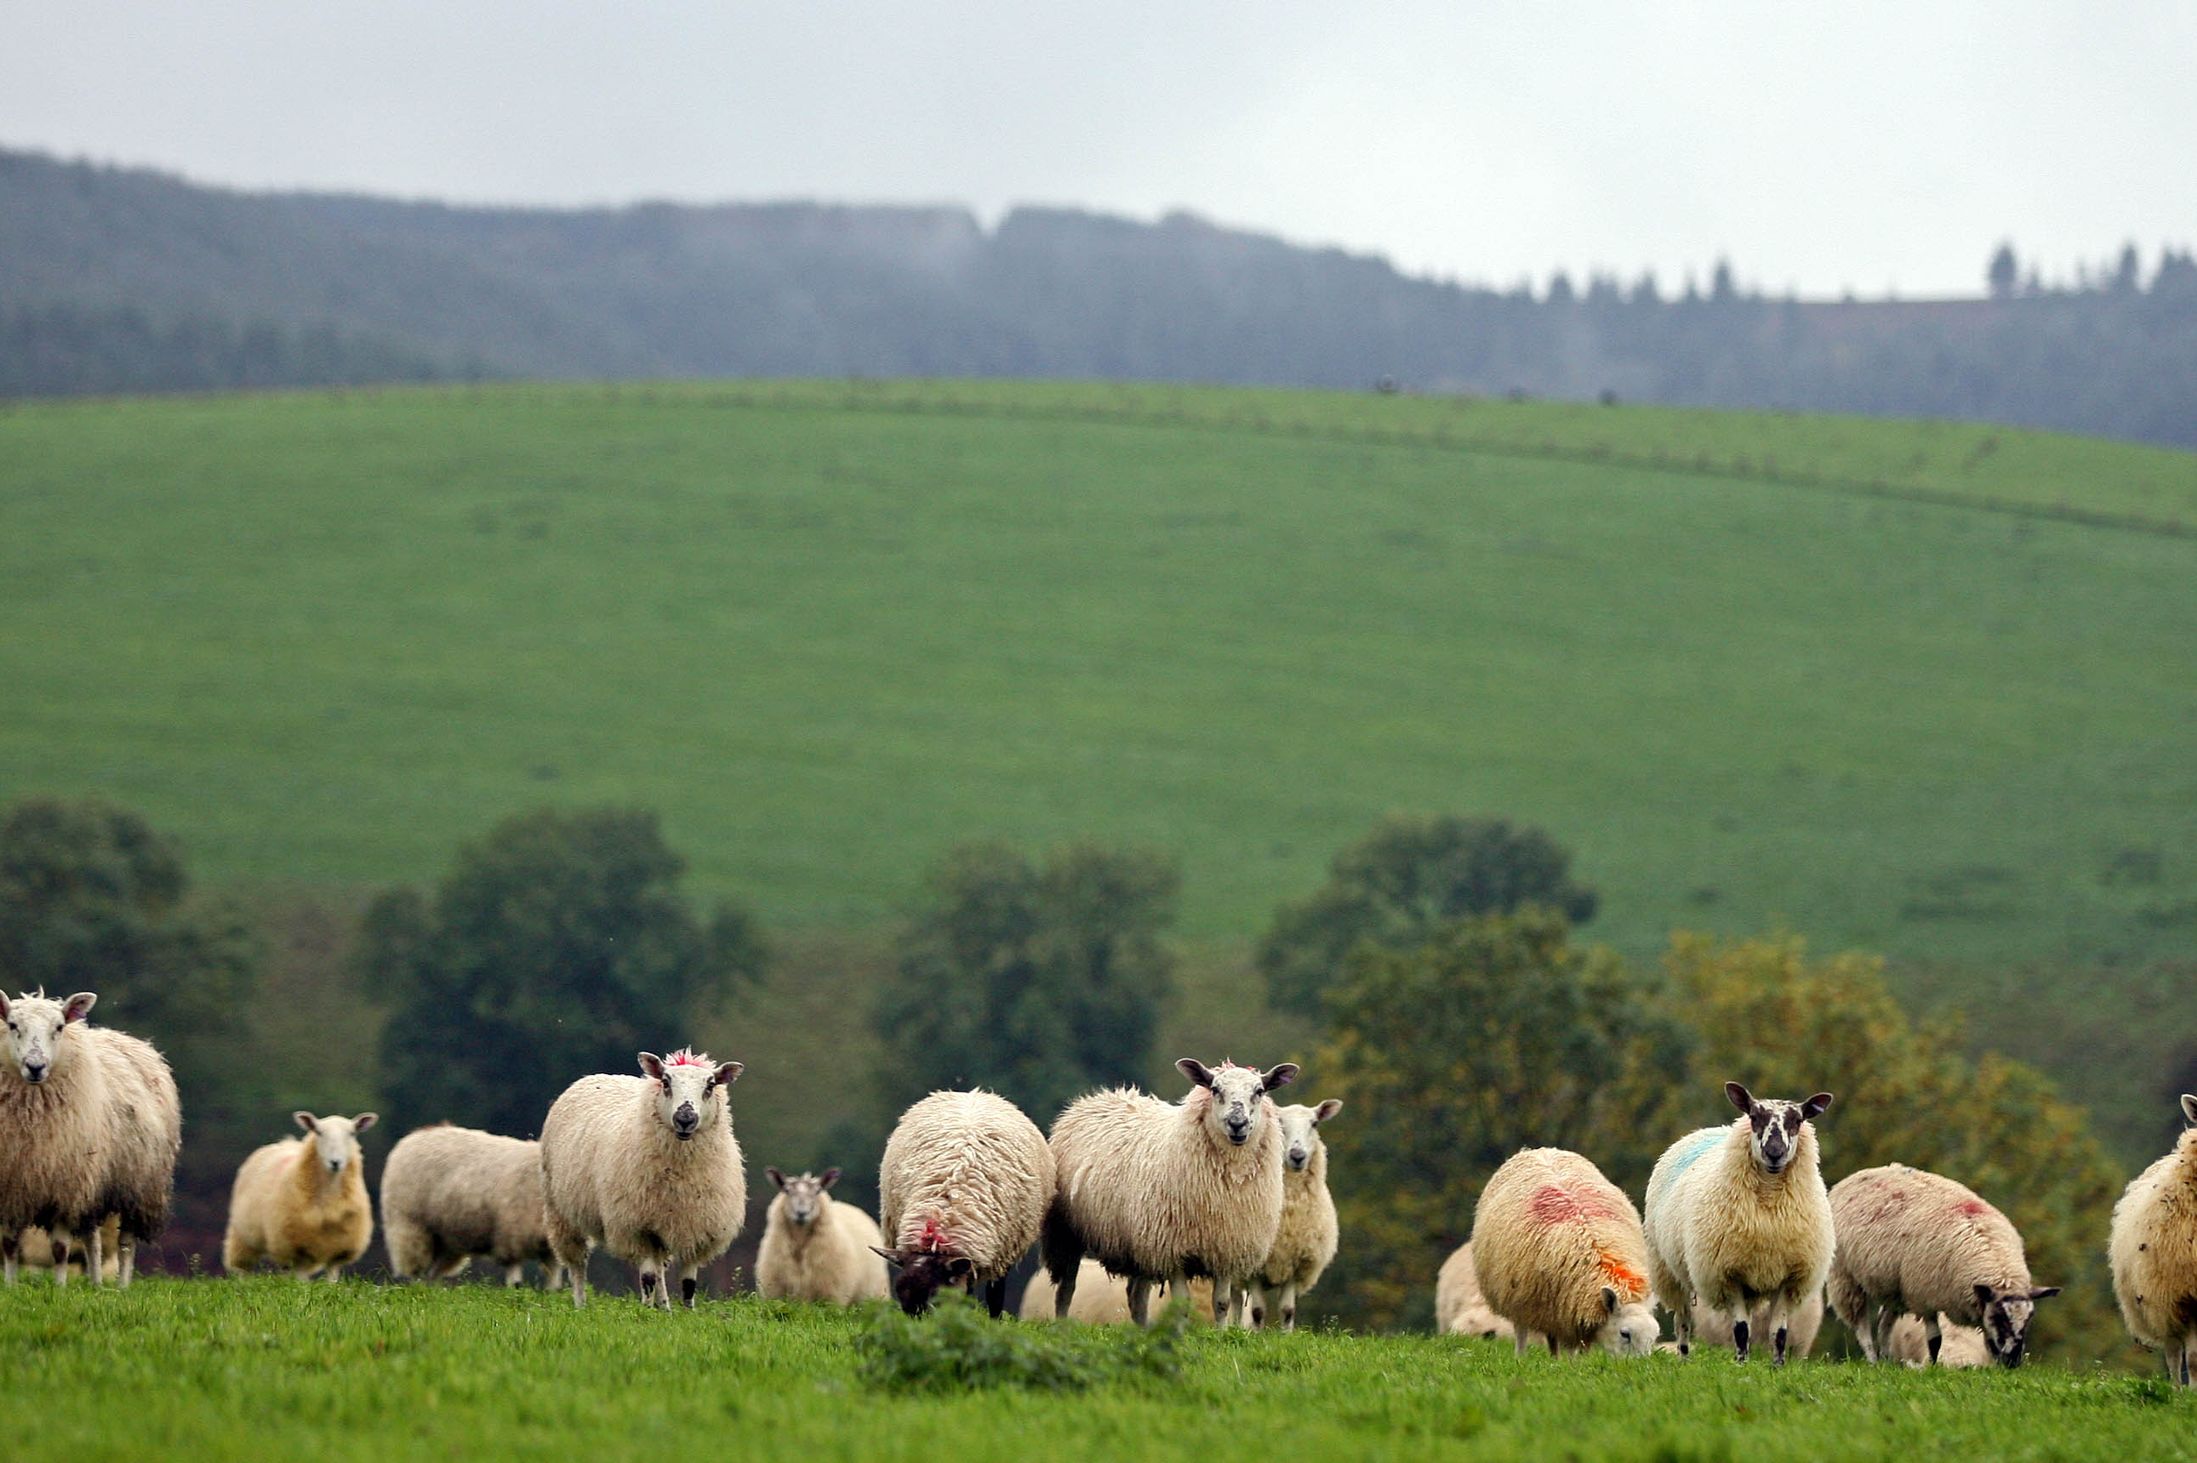 Farmers across all sectors have struggled with cash flow over the past year